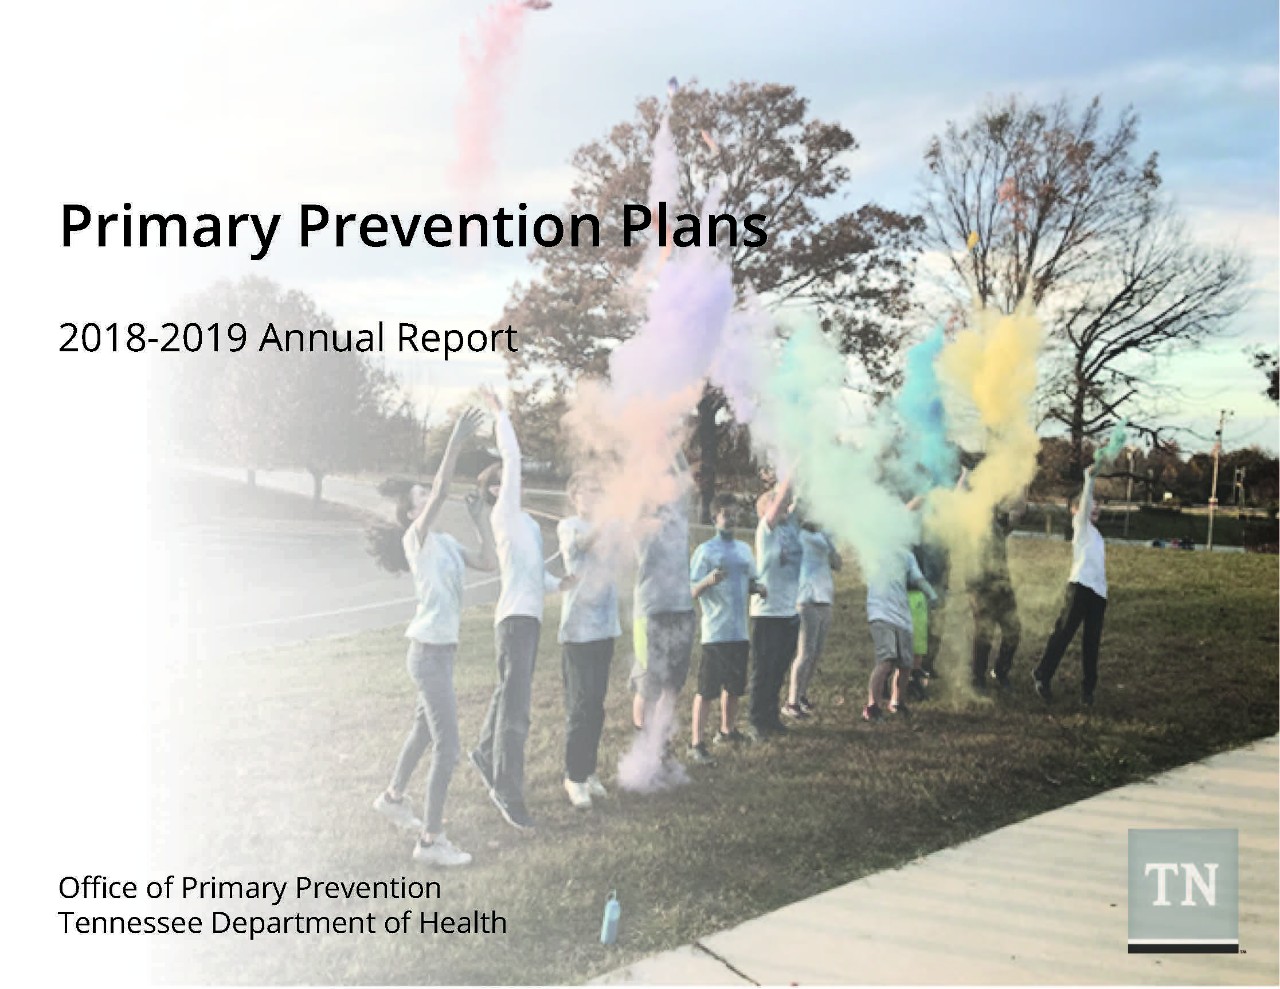 Primary Prevention Plans Annual Report 2018-2019 Cover Image